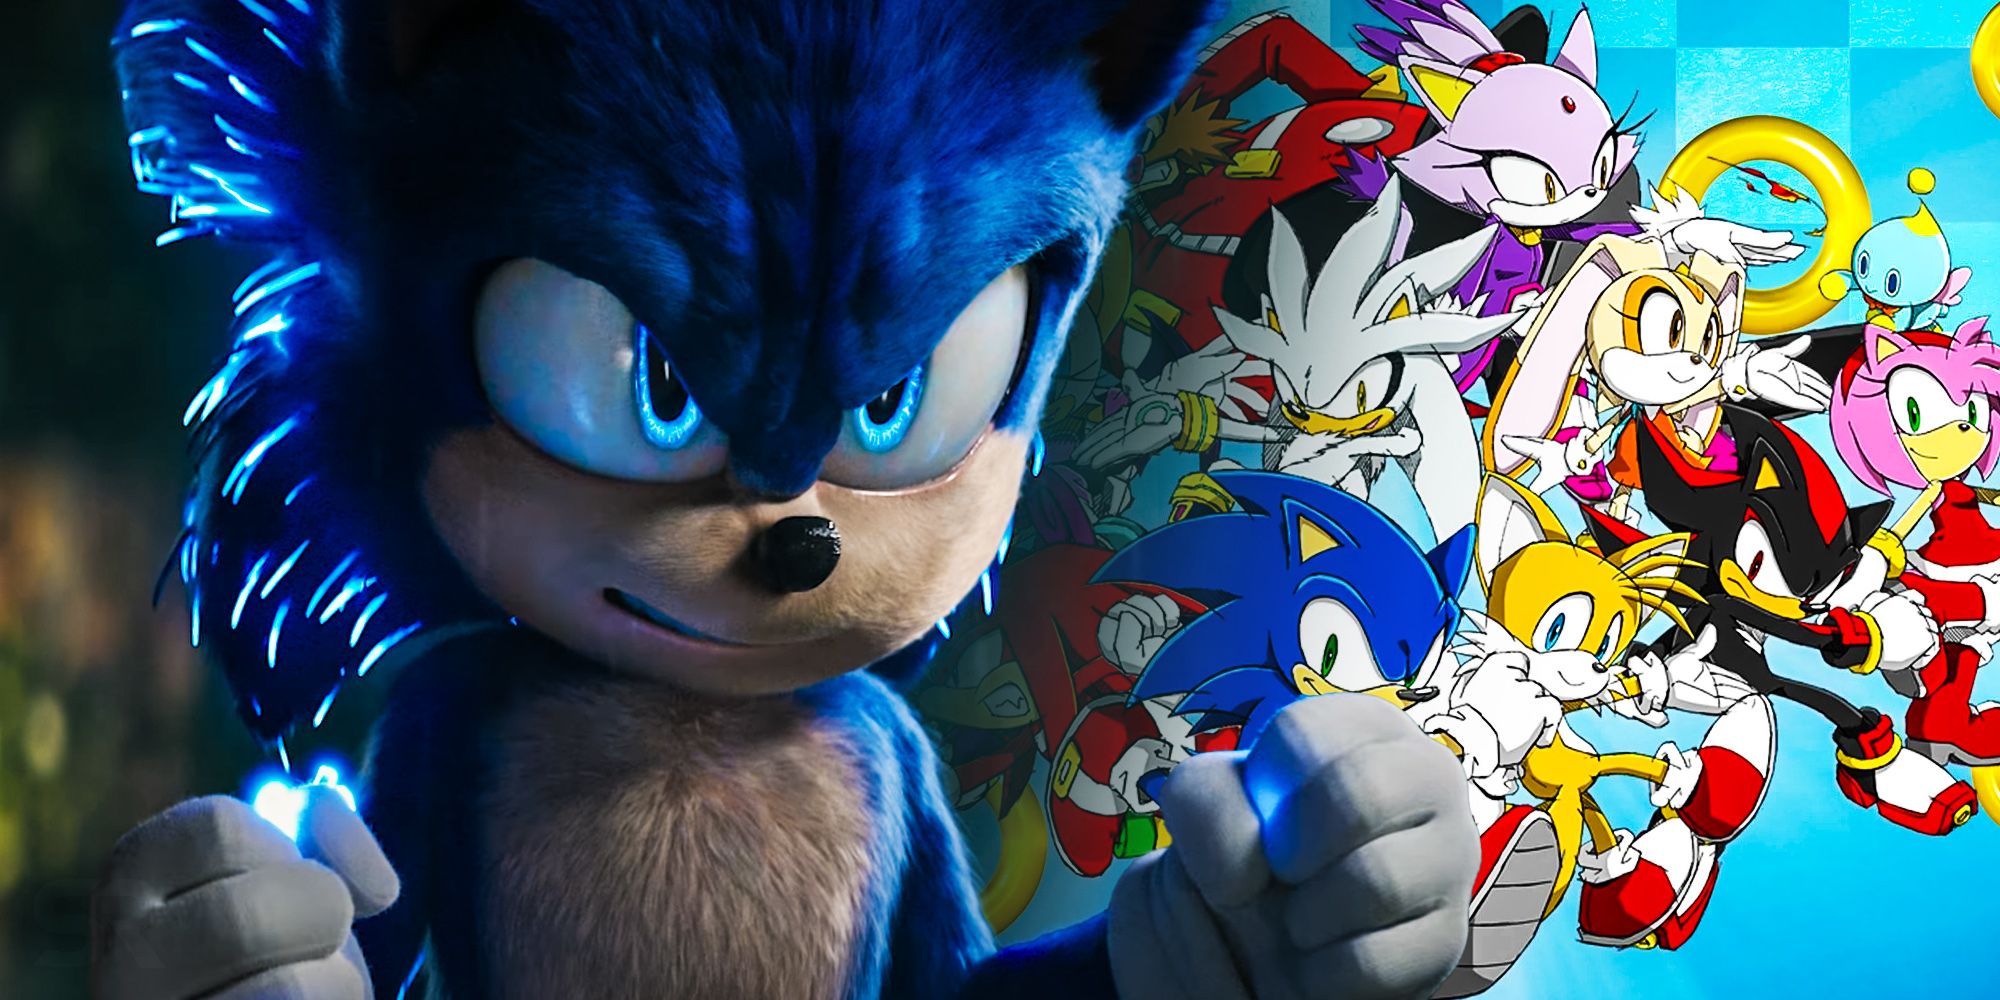 Sonic 3' release date, plot details, and characters for the third movie